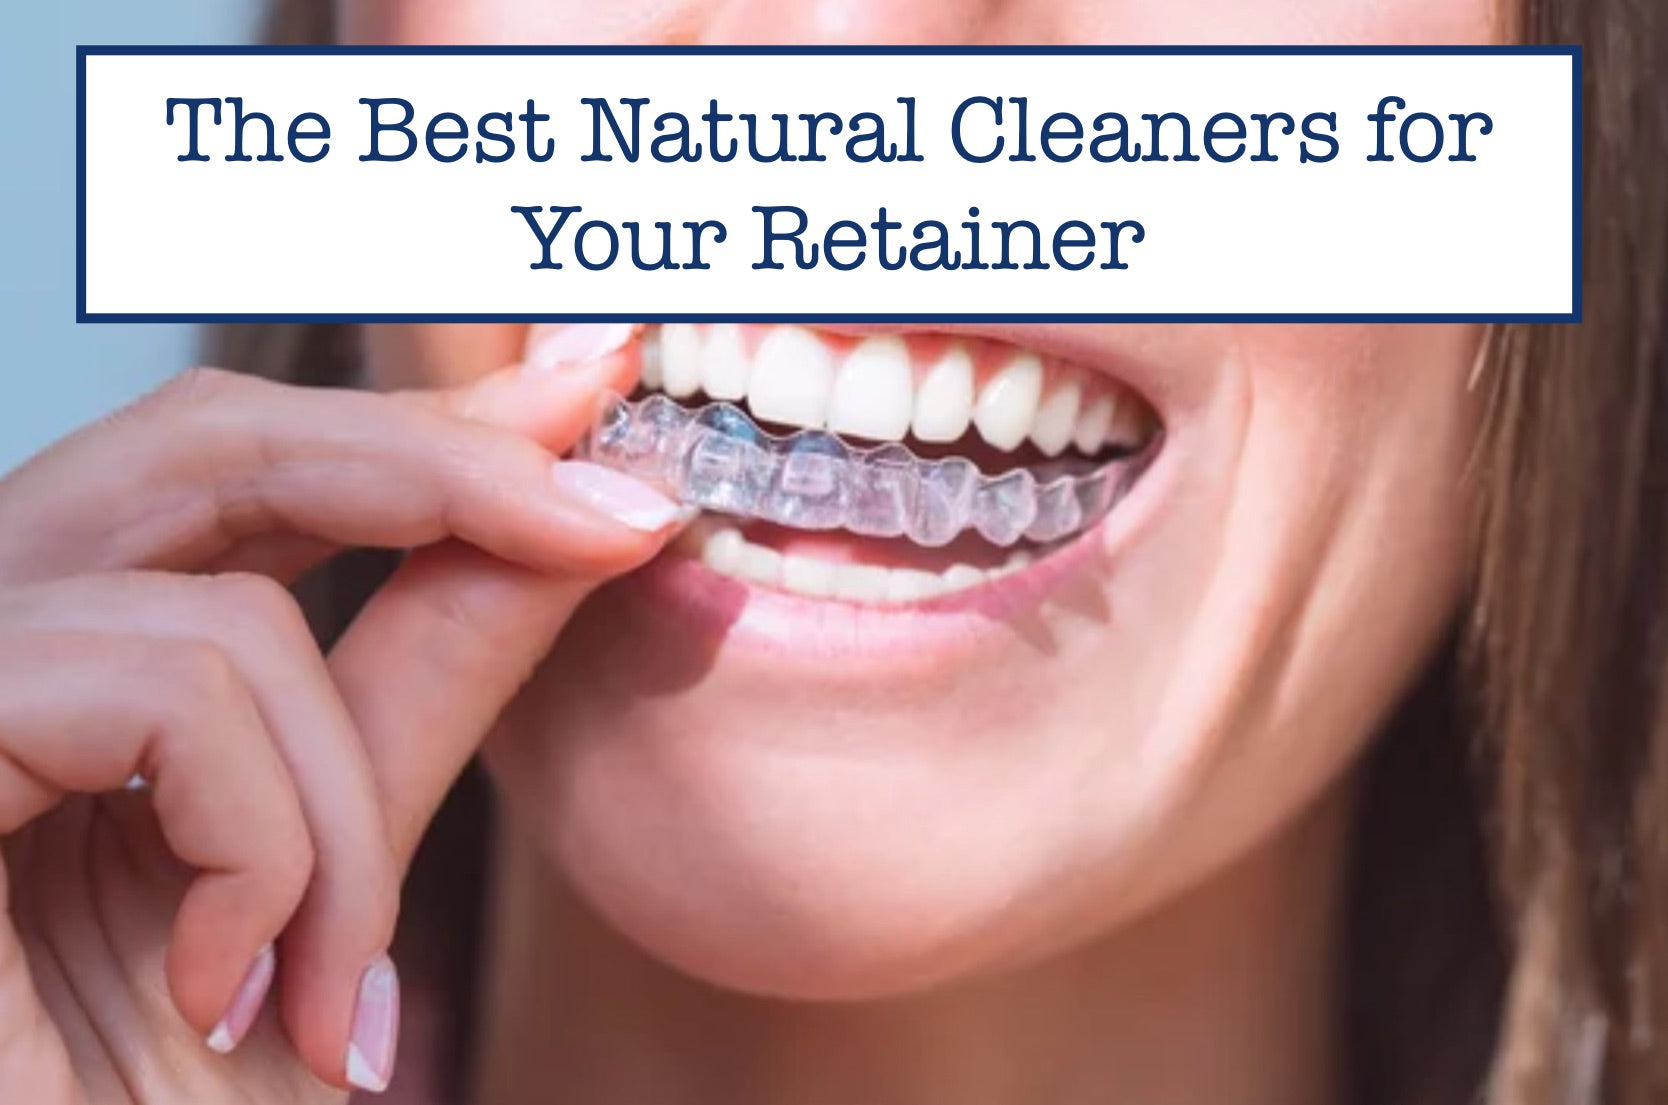 The Best Natural Cleaners for Your Retainer